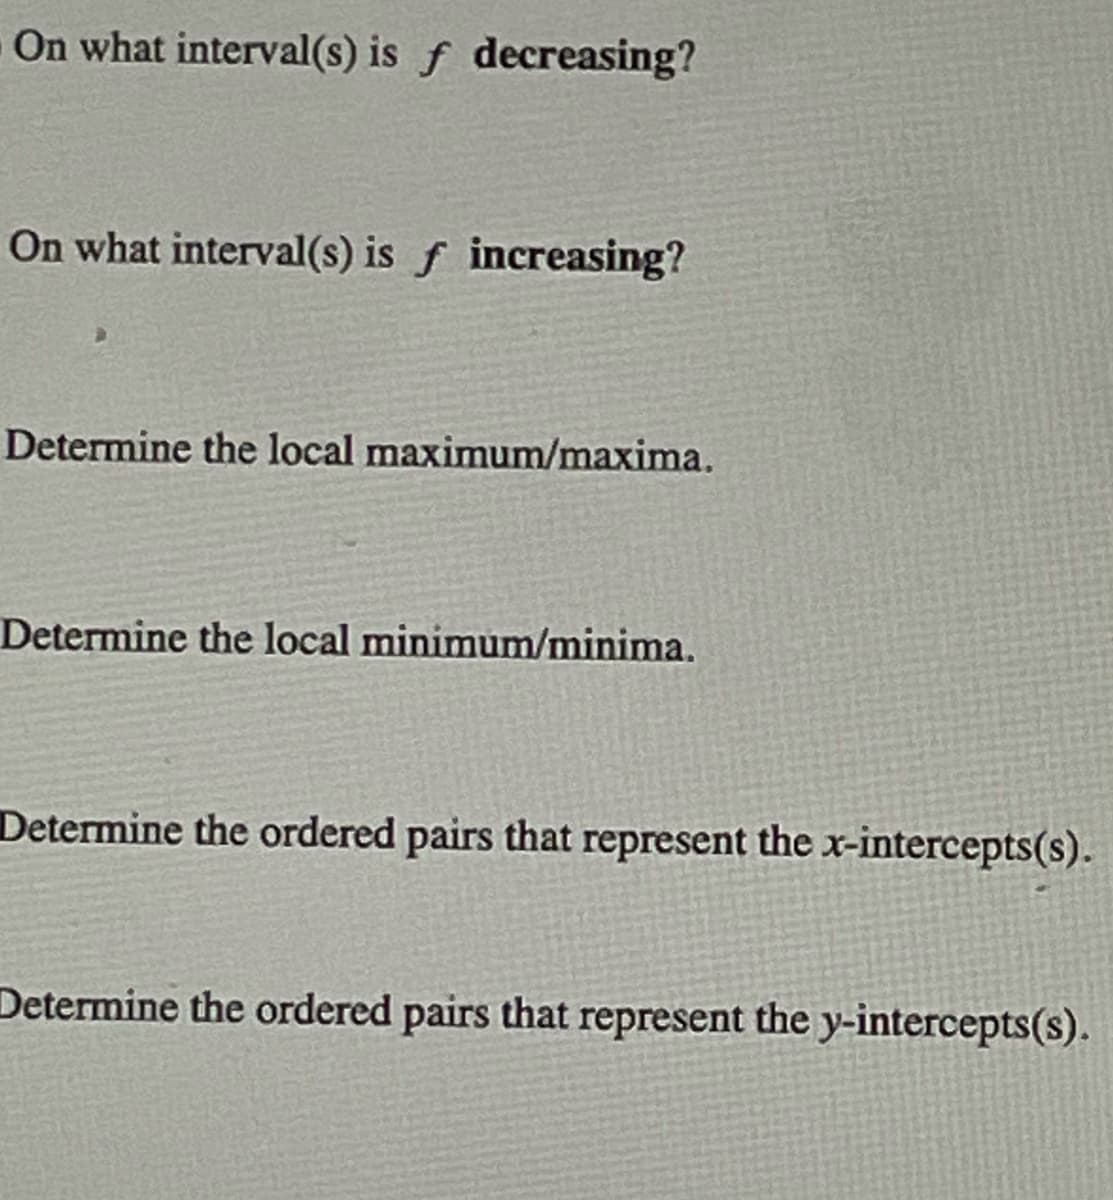 On what interval(s) is f decreasing?
On what interval(s) is f increasing?
Determine the local maximum/maxima.
Determine the local minimum/minima.
Determine the ordered pairs that represent the x-intercepts(s).
Determine the ordered pairs that represent the y-intercepts(s).